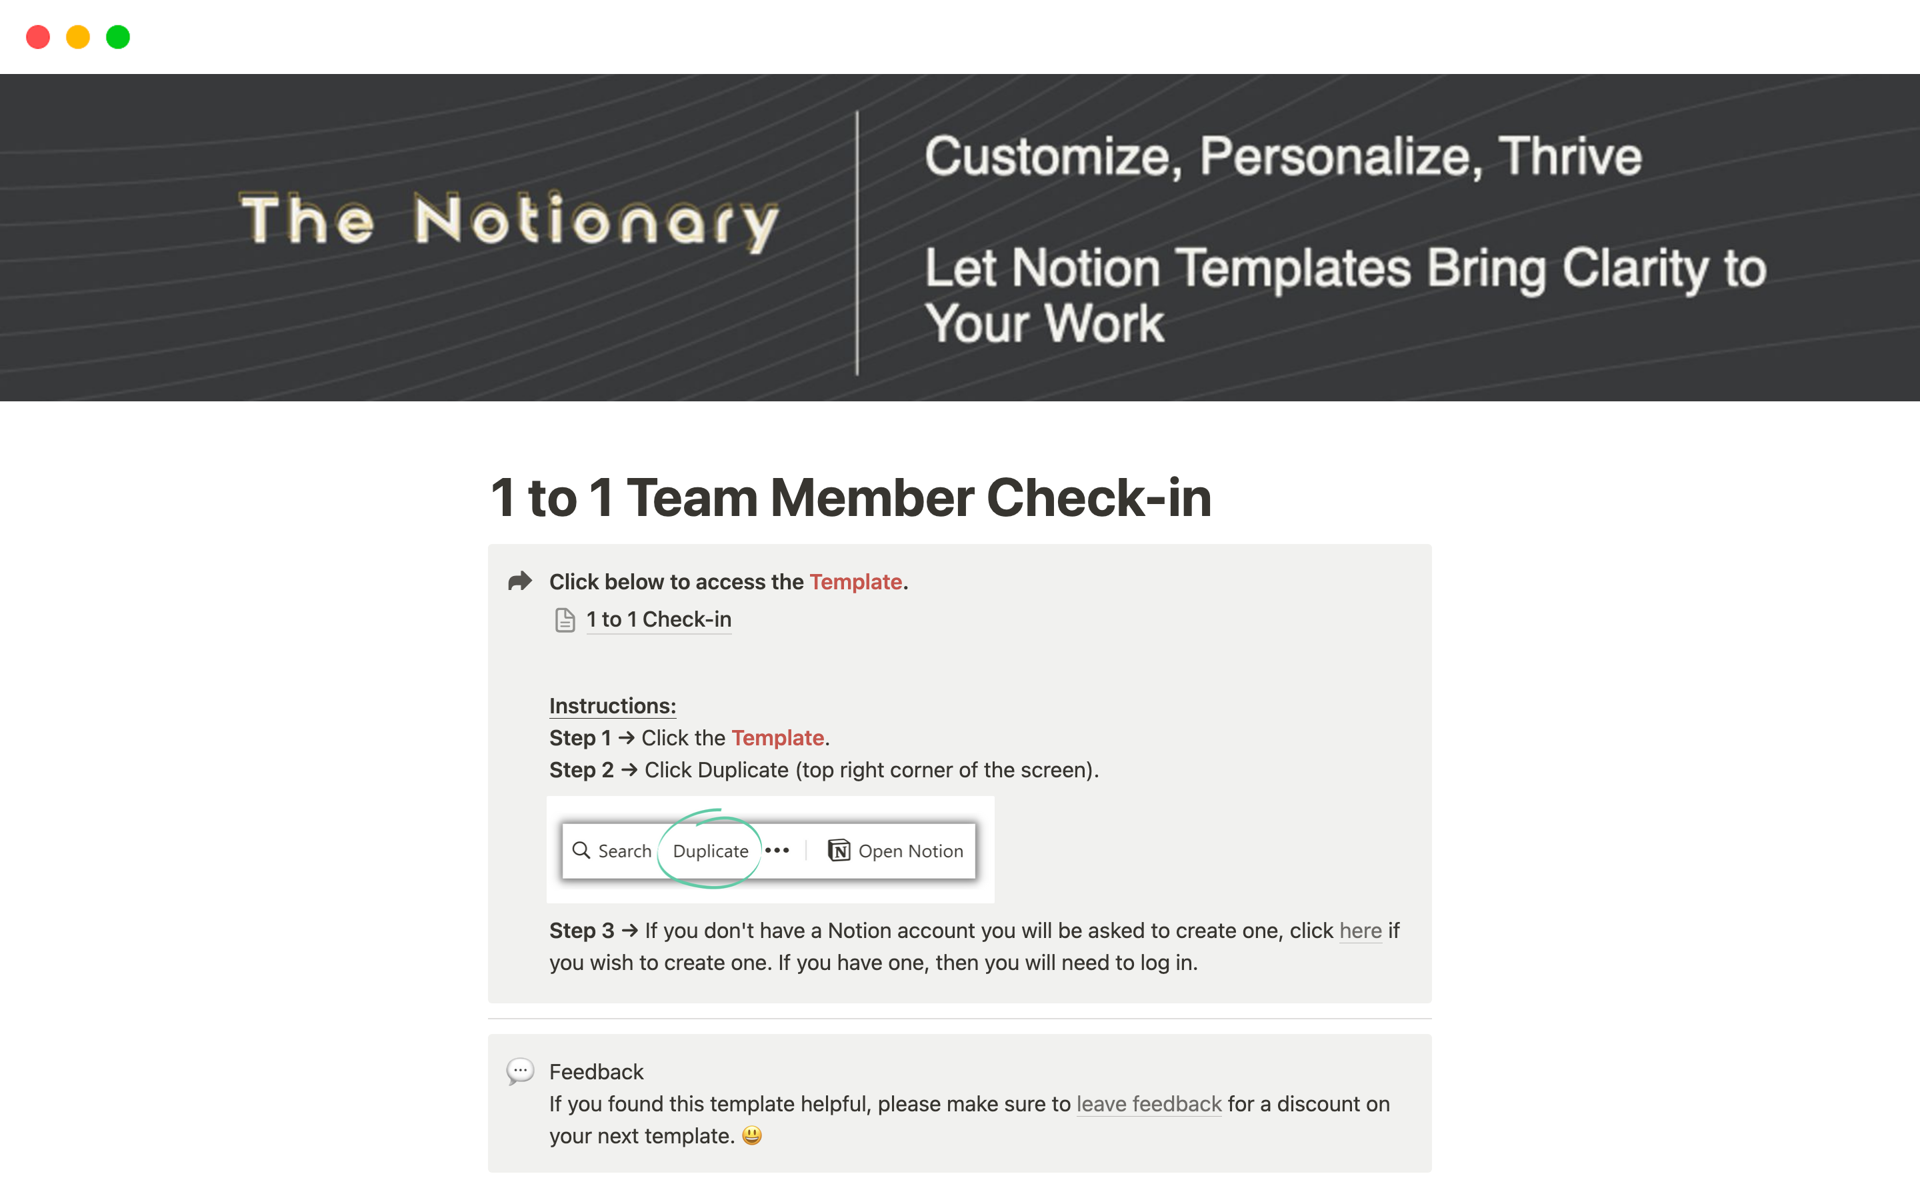 This Notion template is designed to help with productivity and organization.